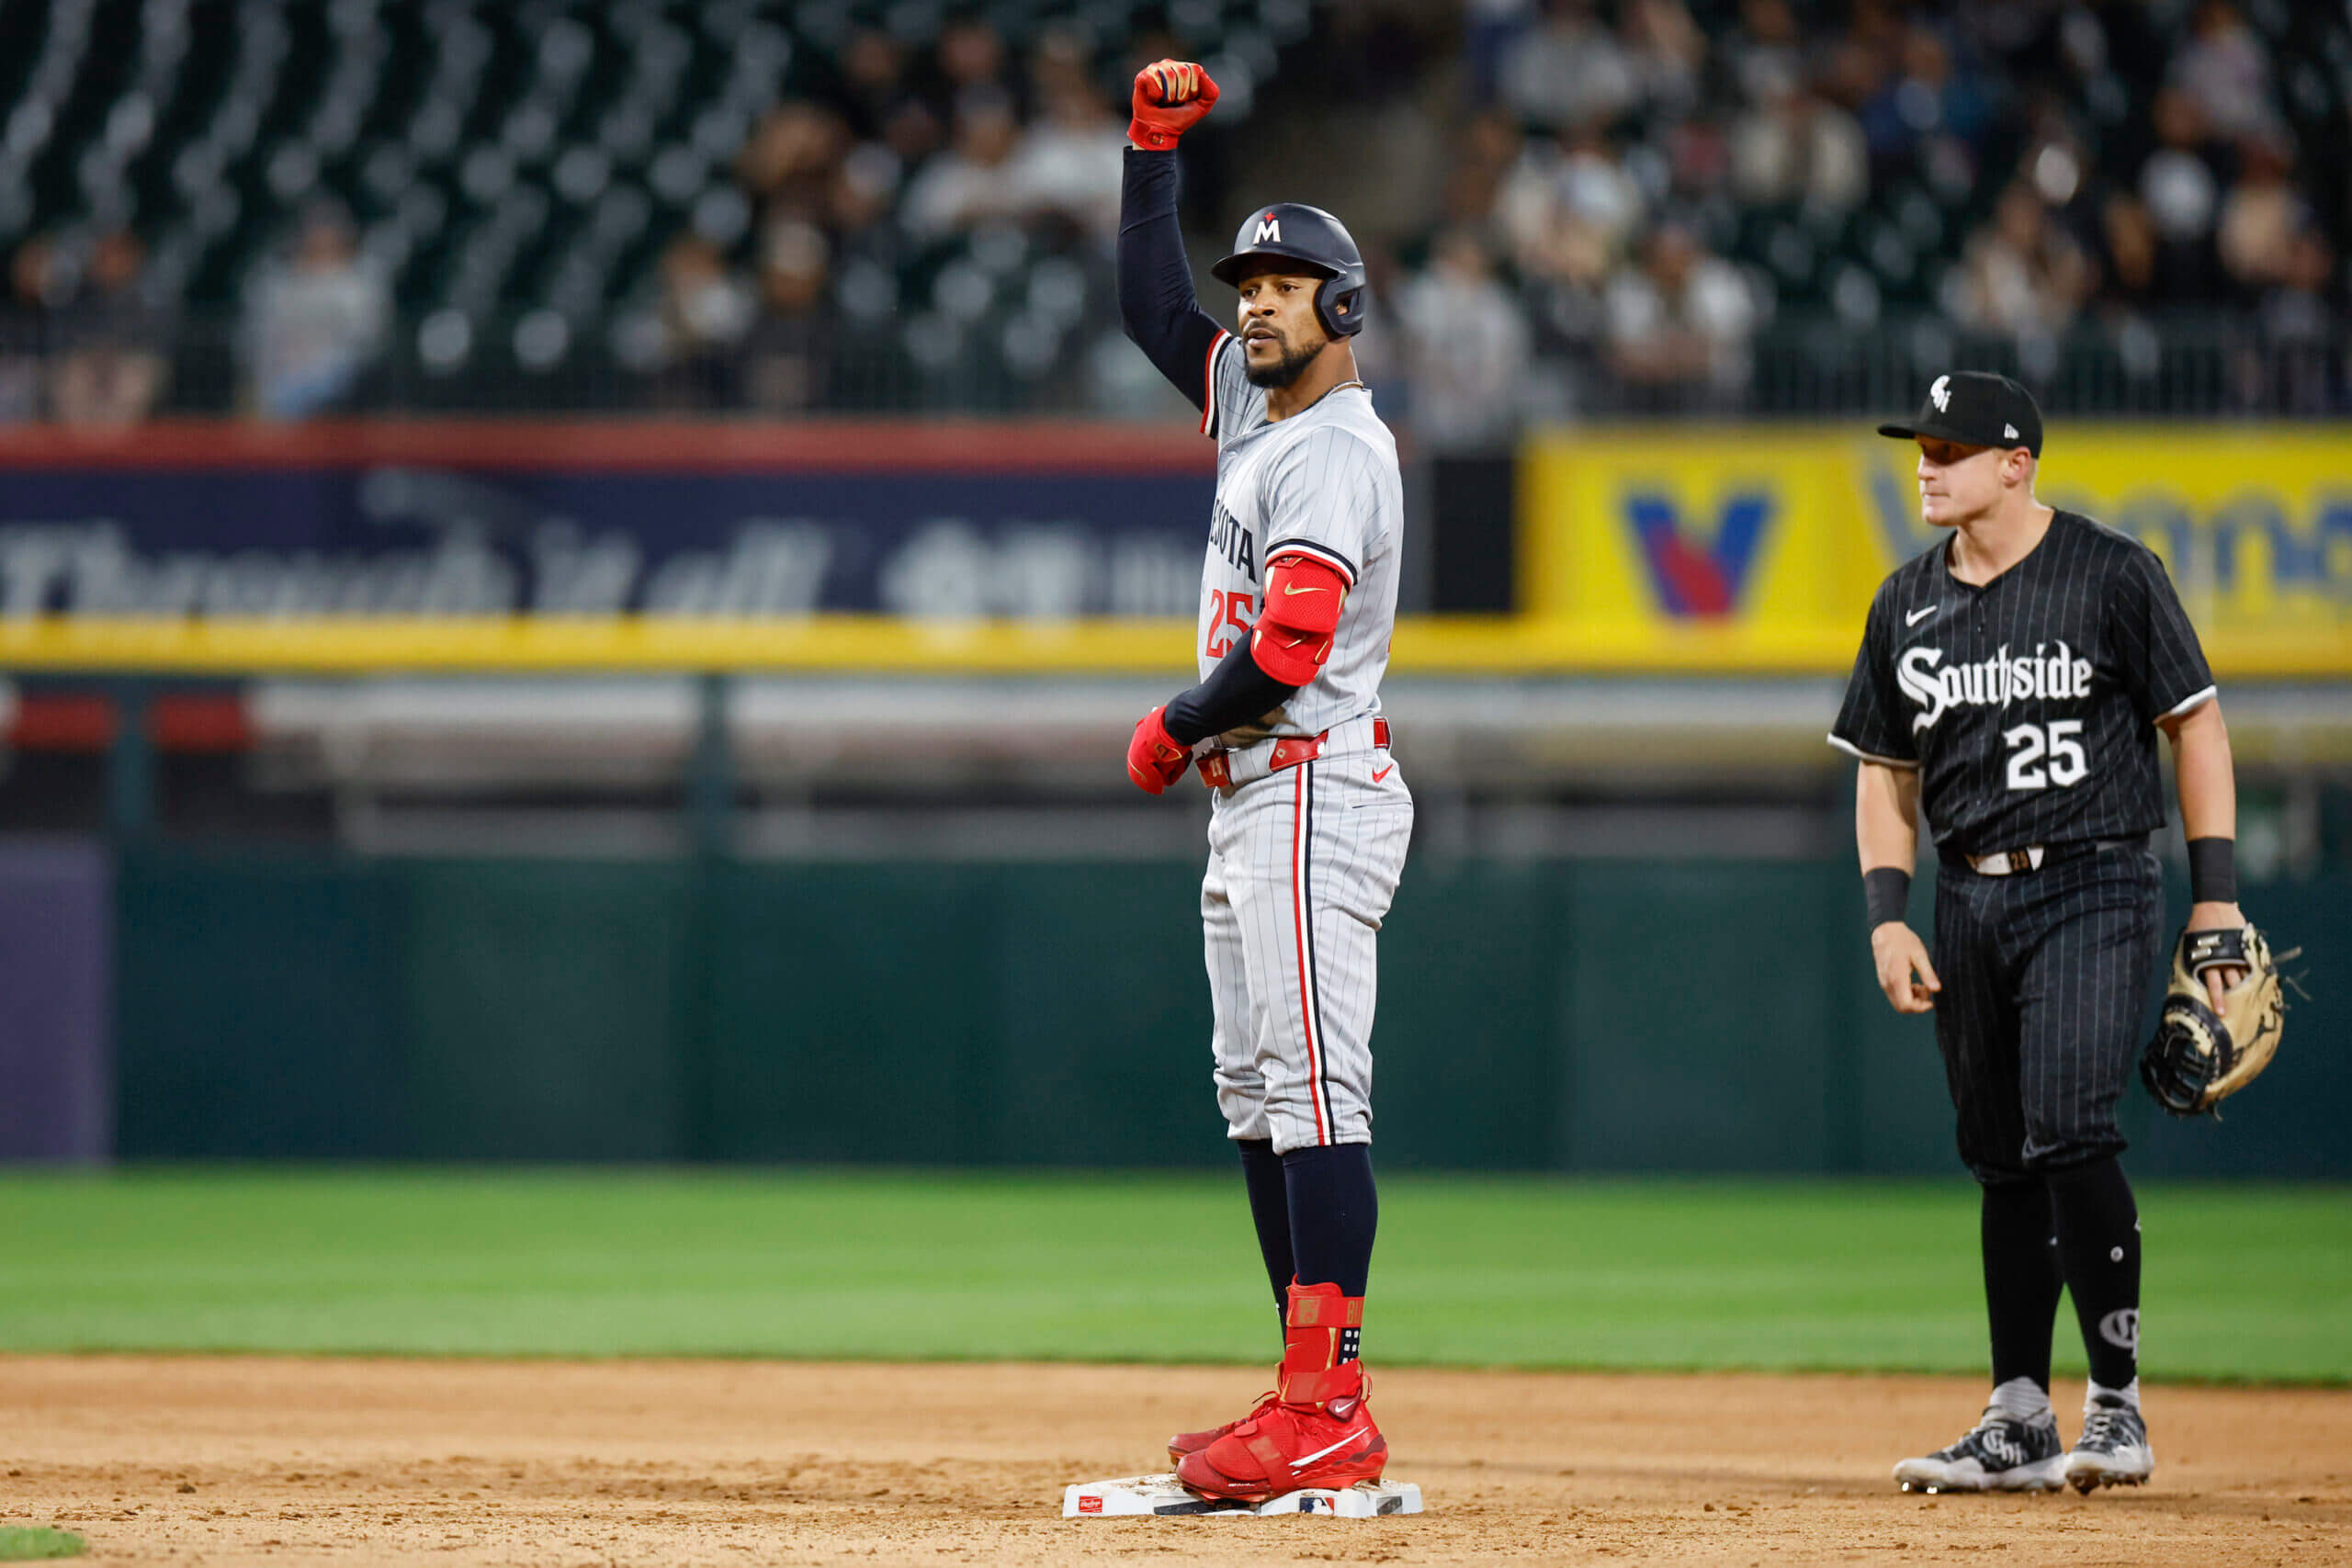 With Byron Buxton set to begin rehab assignment, Twins drop ugly series opener to Yankees